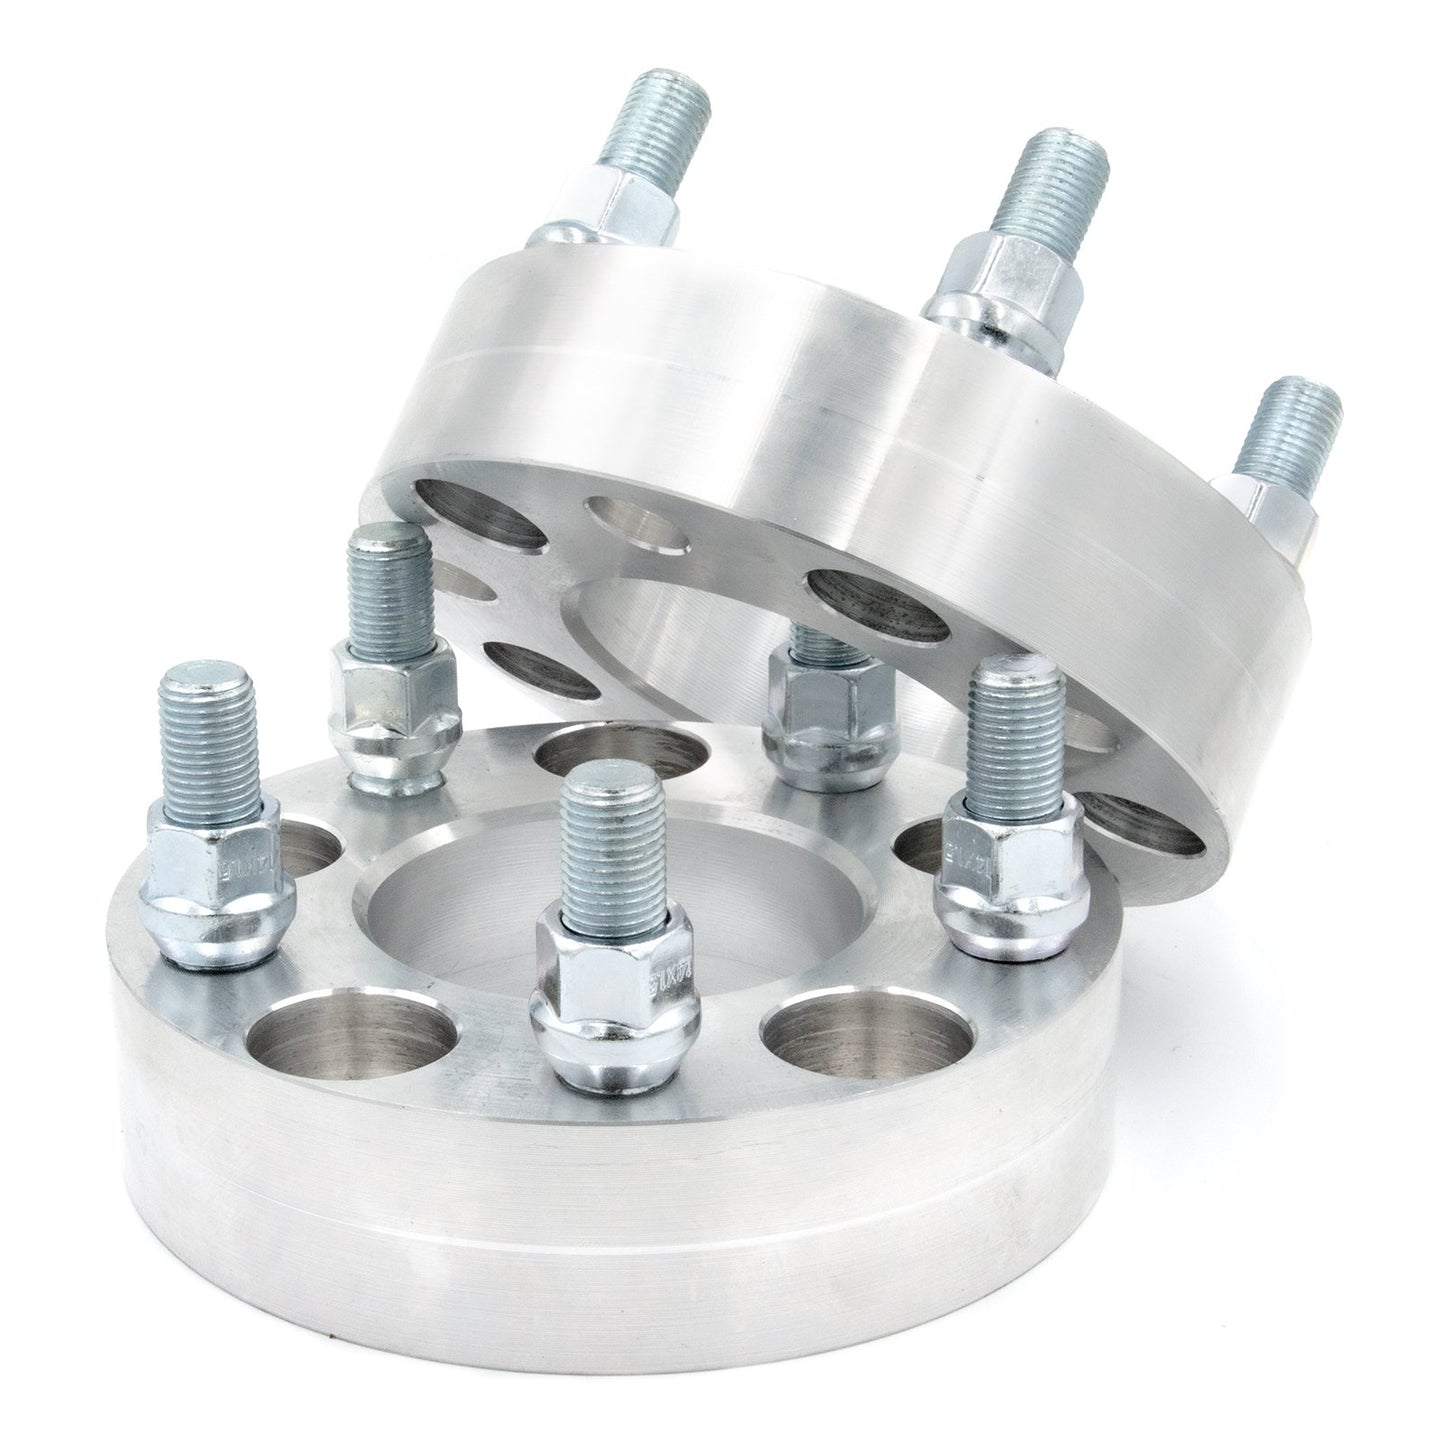 5x4.25" to 5x4.25" Wheel Spacer/Adapter - Thickness: 3/4"- 4"